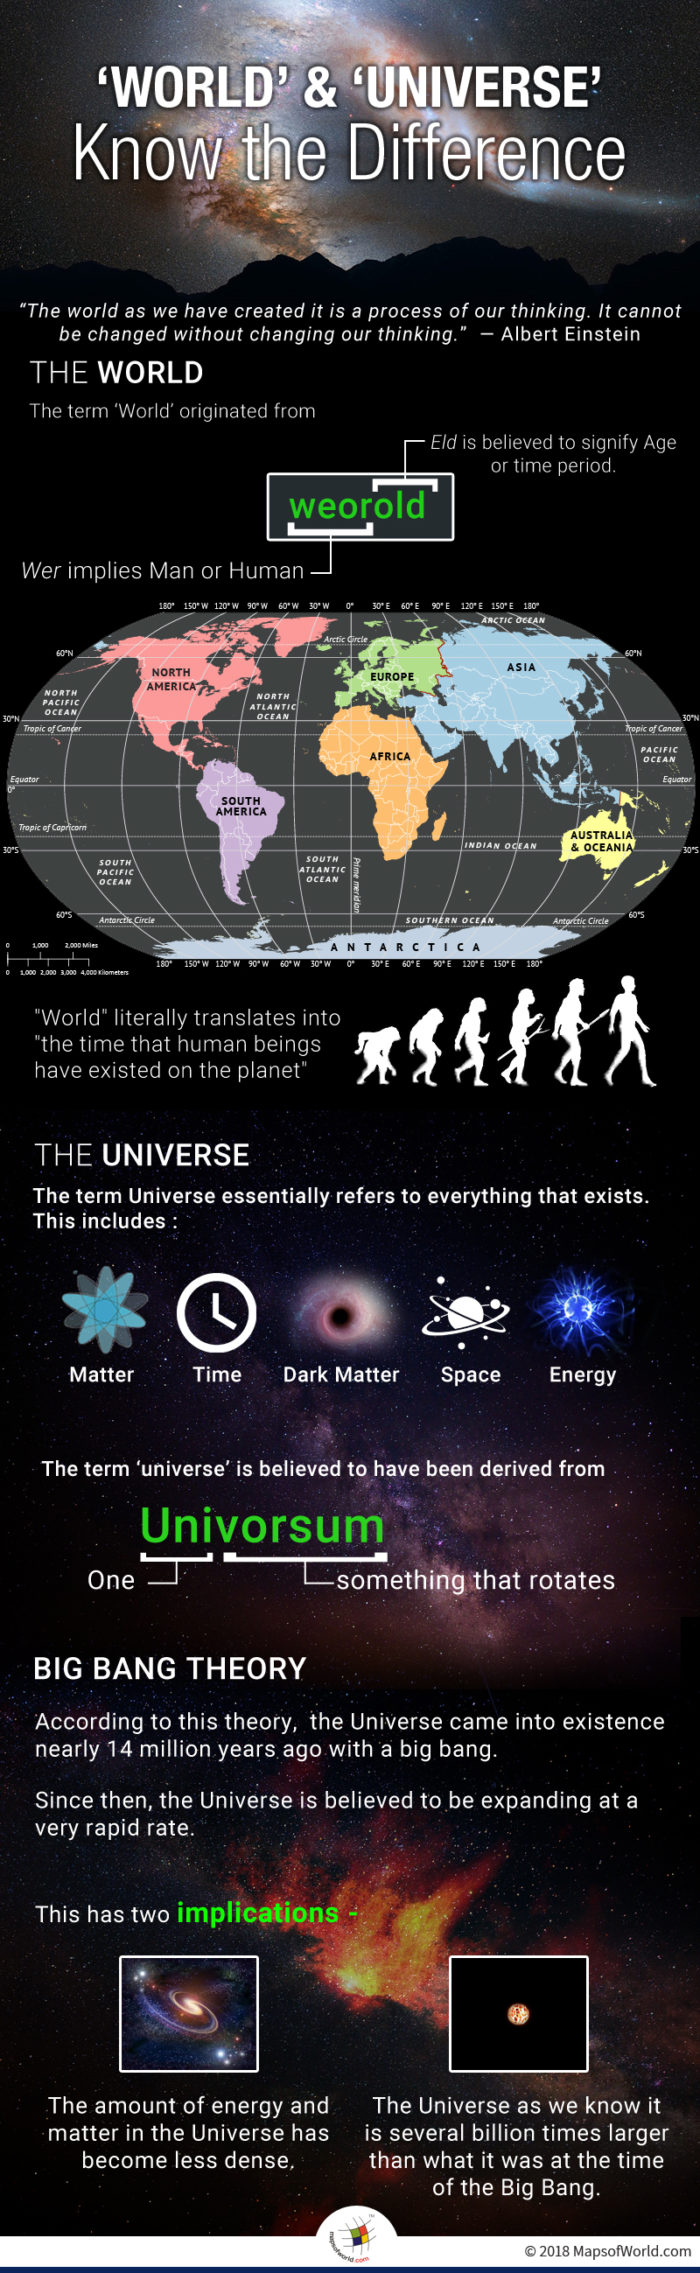 Infographic elaborating difference between 'World' and 'Universe'